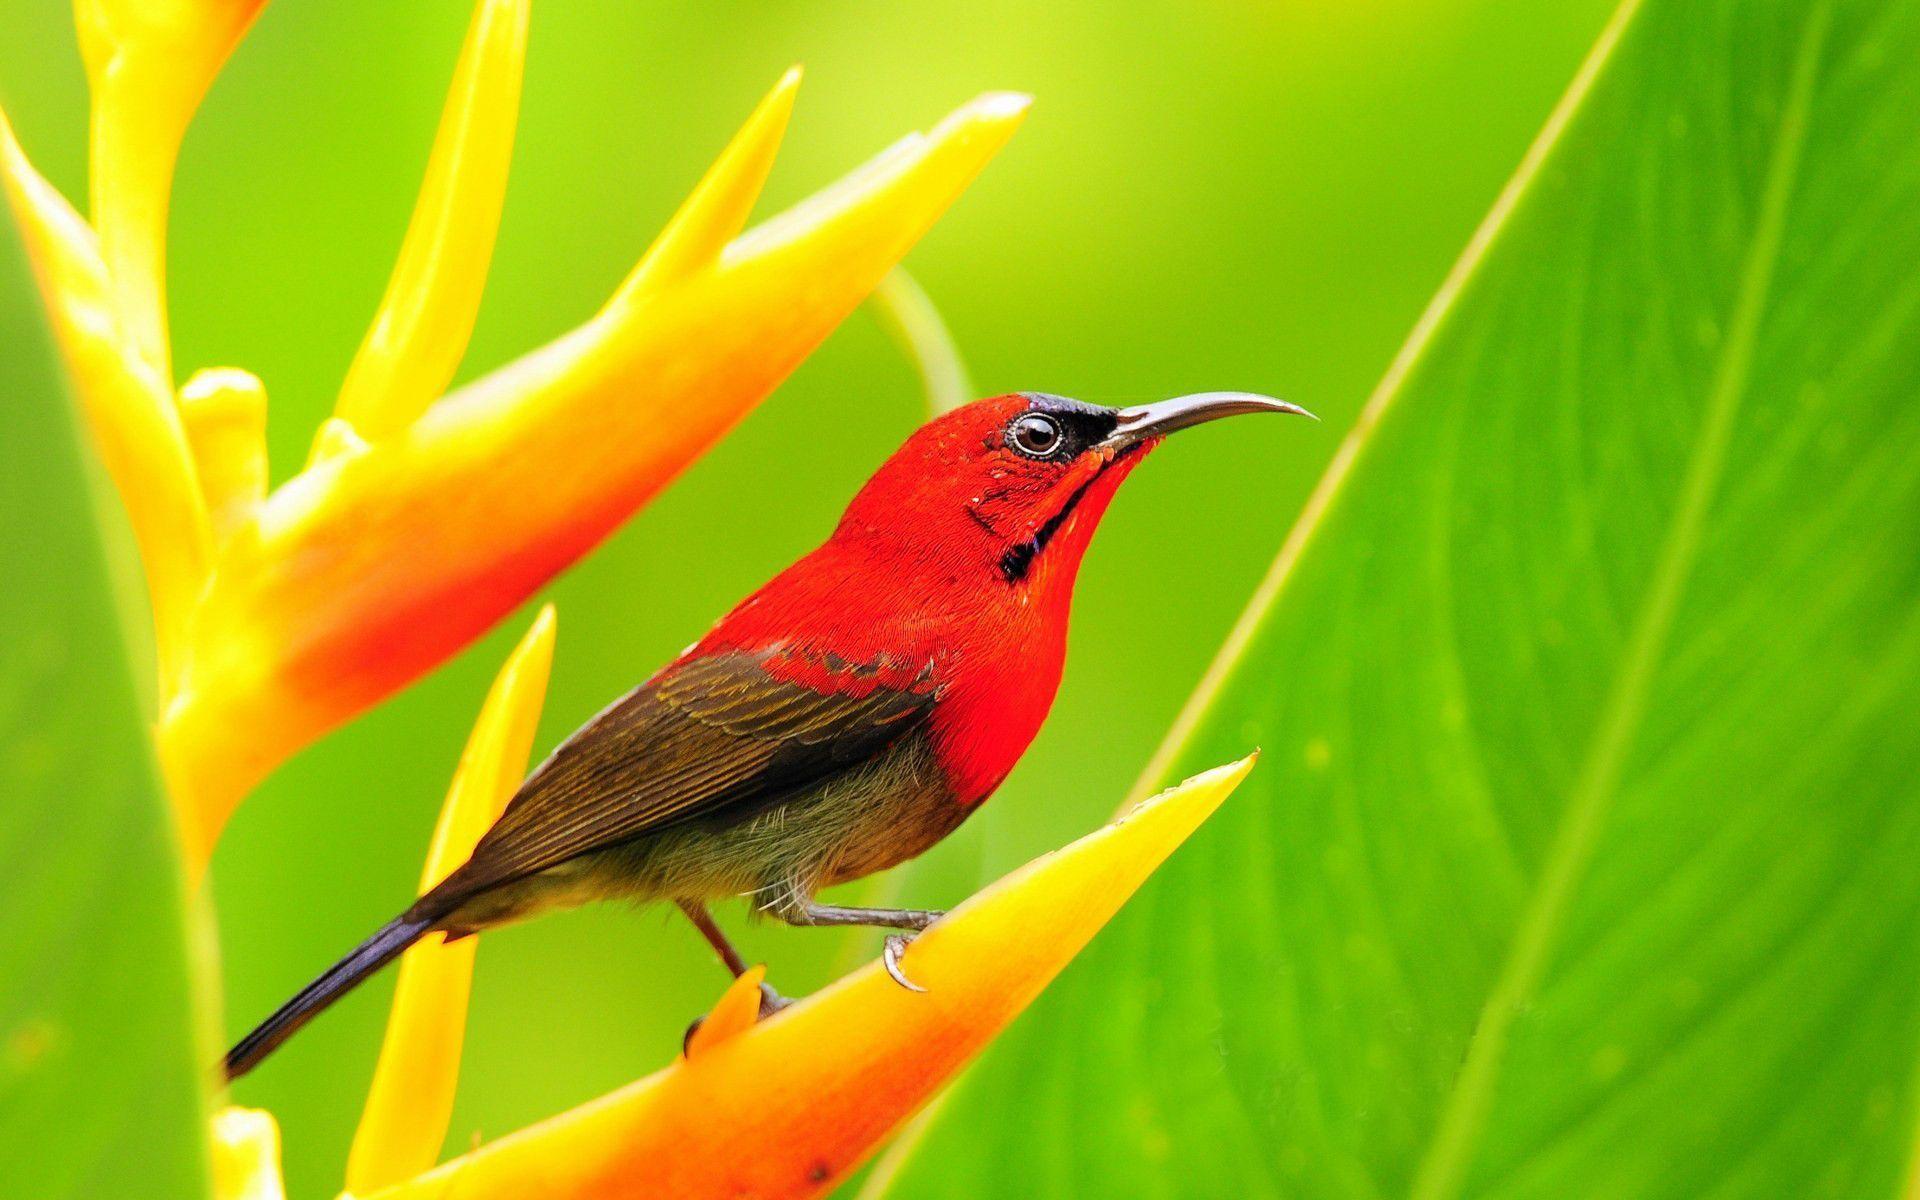 Red Bird wallpaper and image, picture, photo